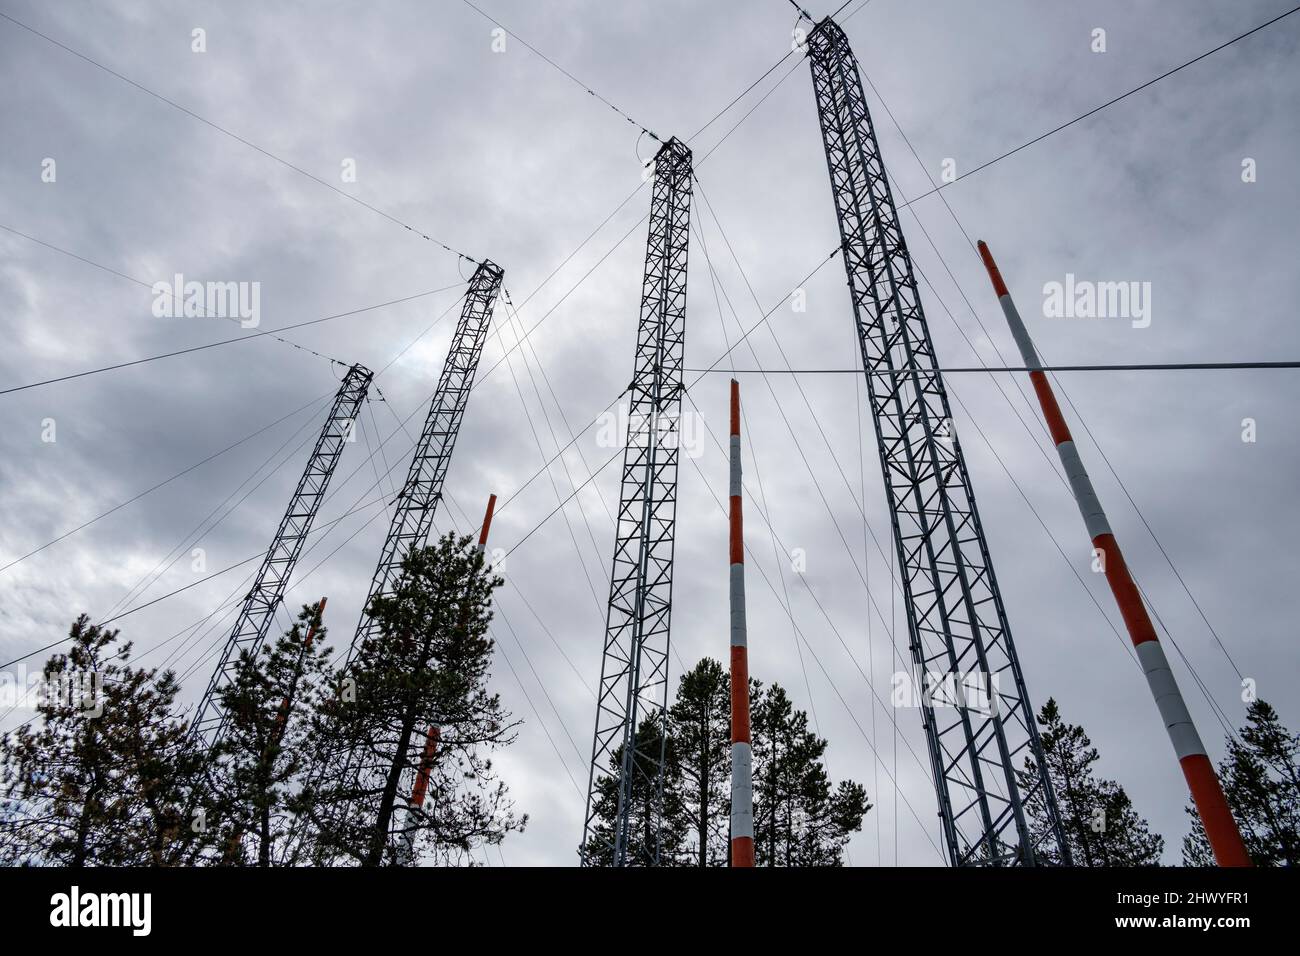 Communication Towers in the forest, Ripple Rock Hiking Trail, Seymore Narrows, Vancouver Island, British Columbia, Canada Stock Photo